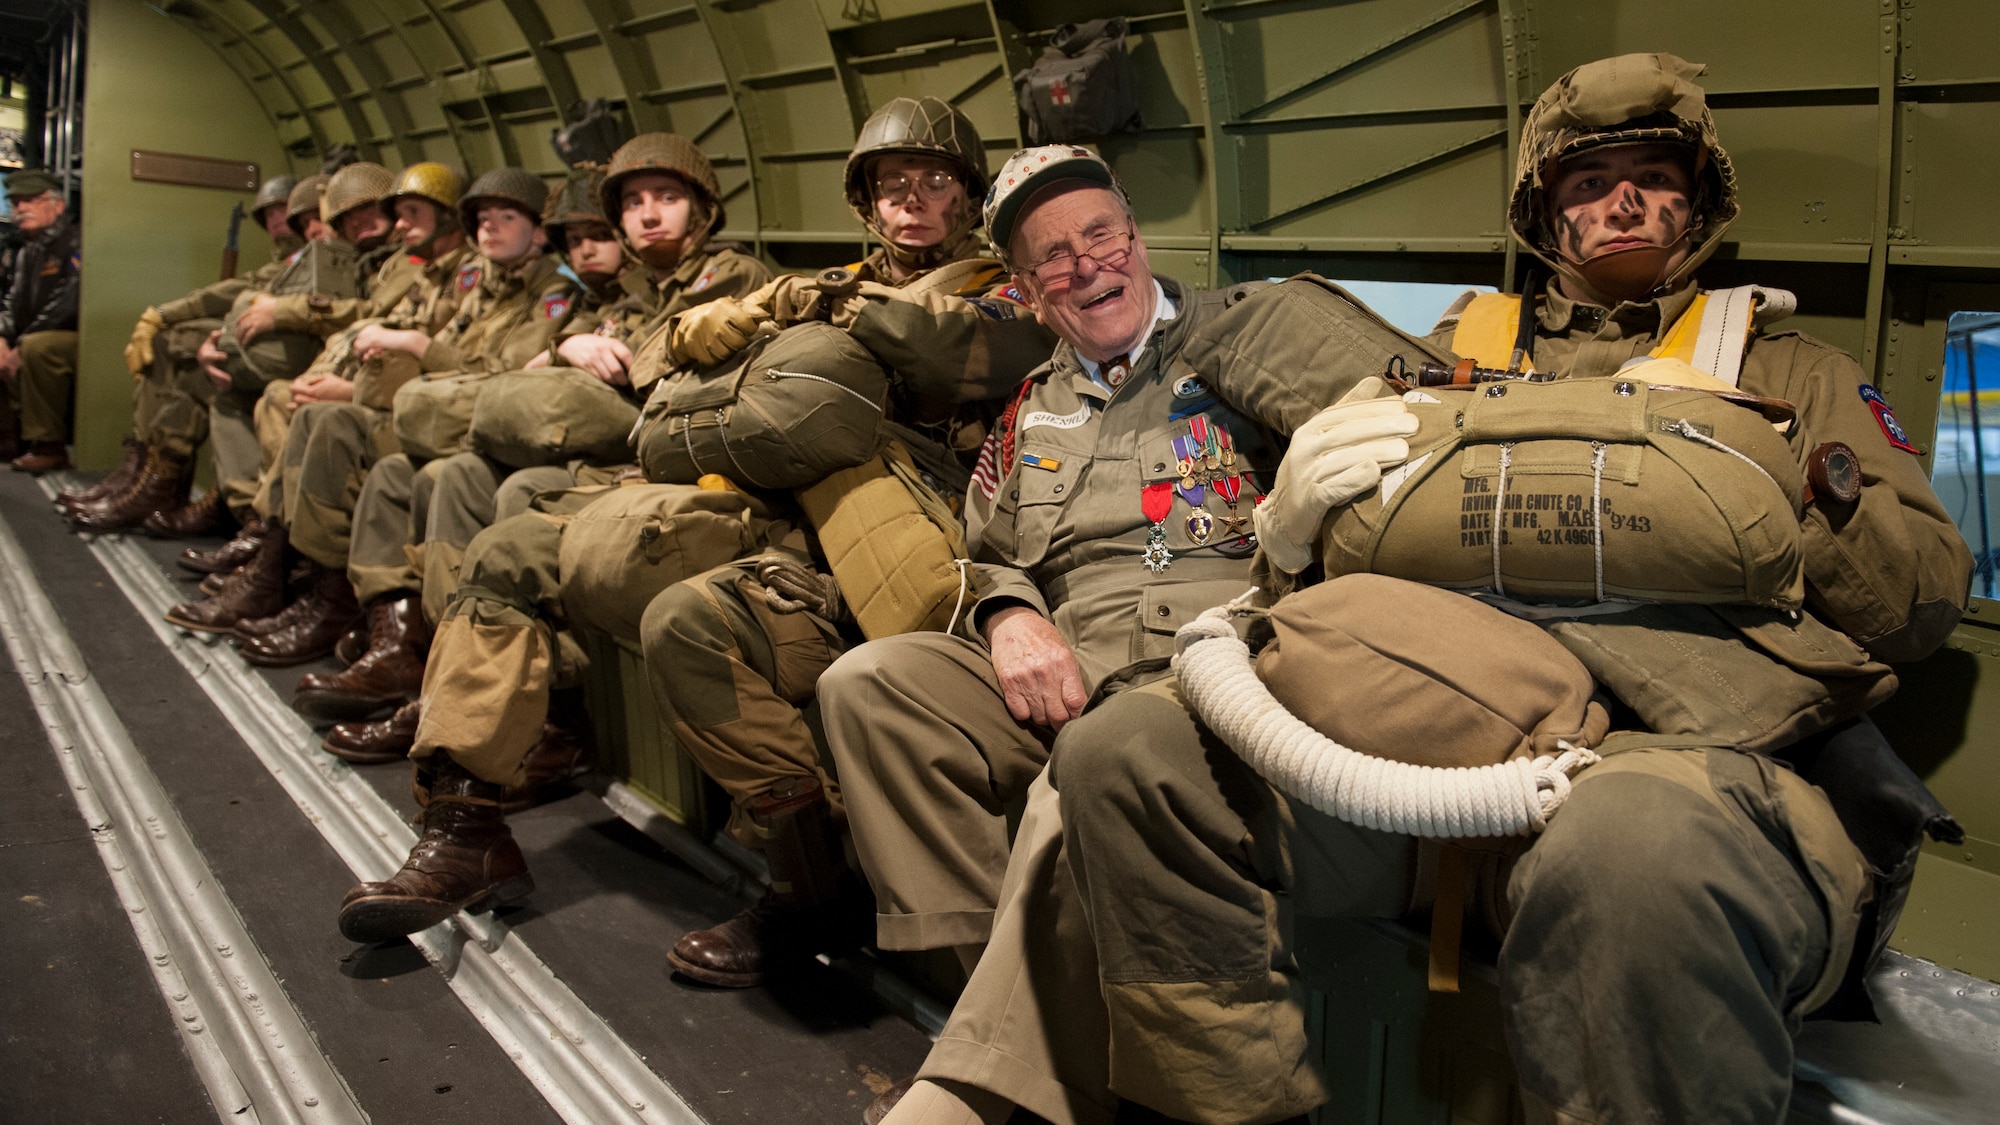 George Shenkle sits with re-enactors, who are depicting World War II-era paratroopers from the 82nd Airborne Division, inside a C-47A Skytrain April 18, 2015, at the Air Mobility Command Museum near Dover Air Force Base, Del. Shenkle is sitting in the same seat position on the very aircraft that he jumped out of on D-Day, June 6, 1944, over Normandy, France. (U.S. Air Force photo/Airman 1st Class Zachary Cacicia)